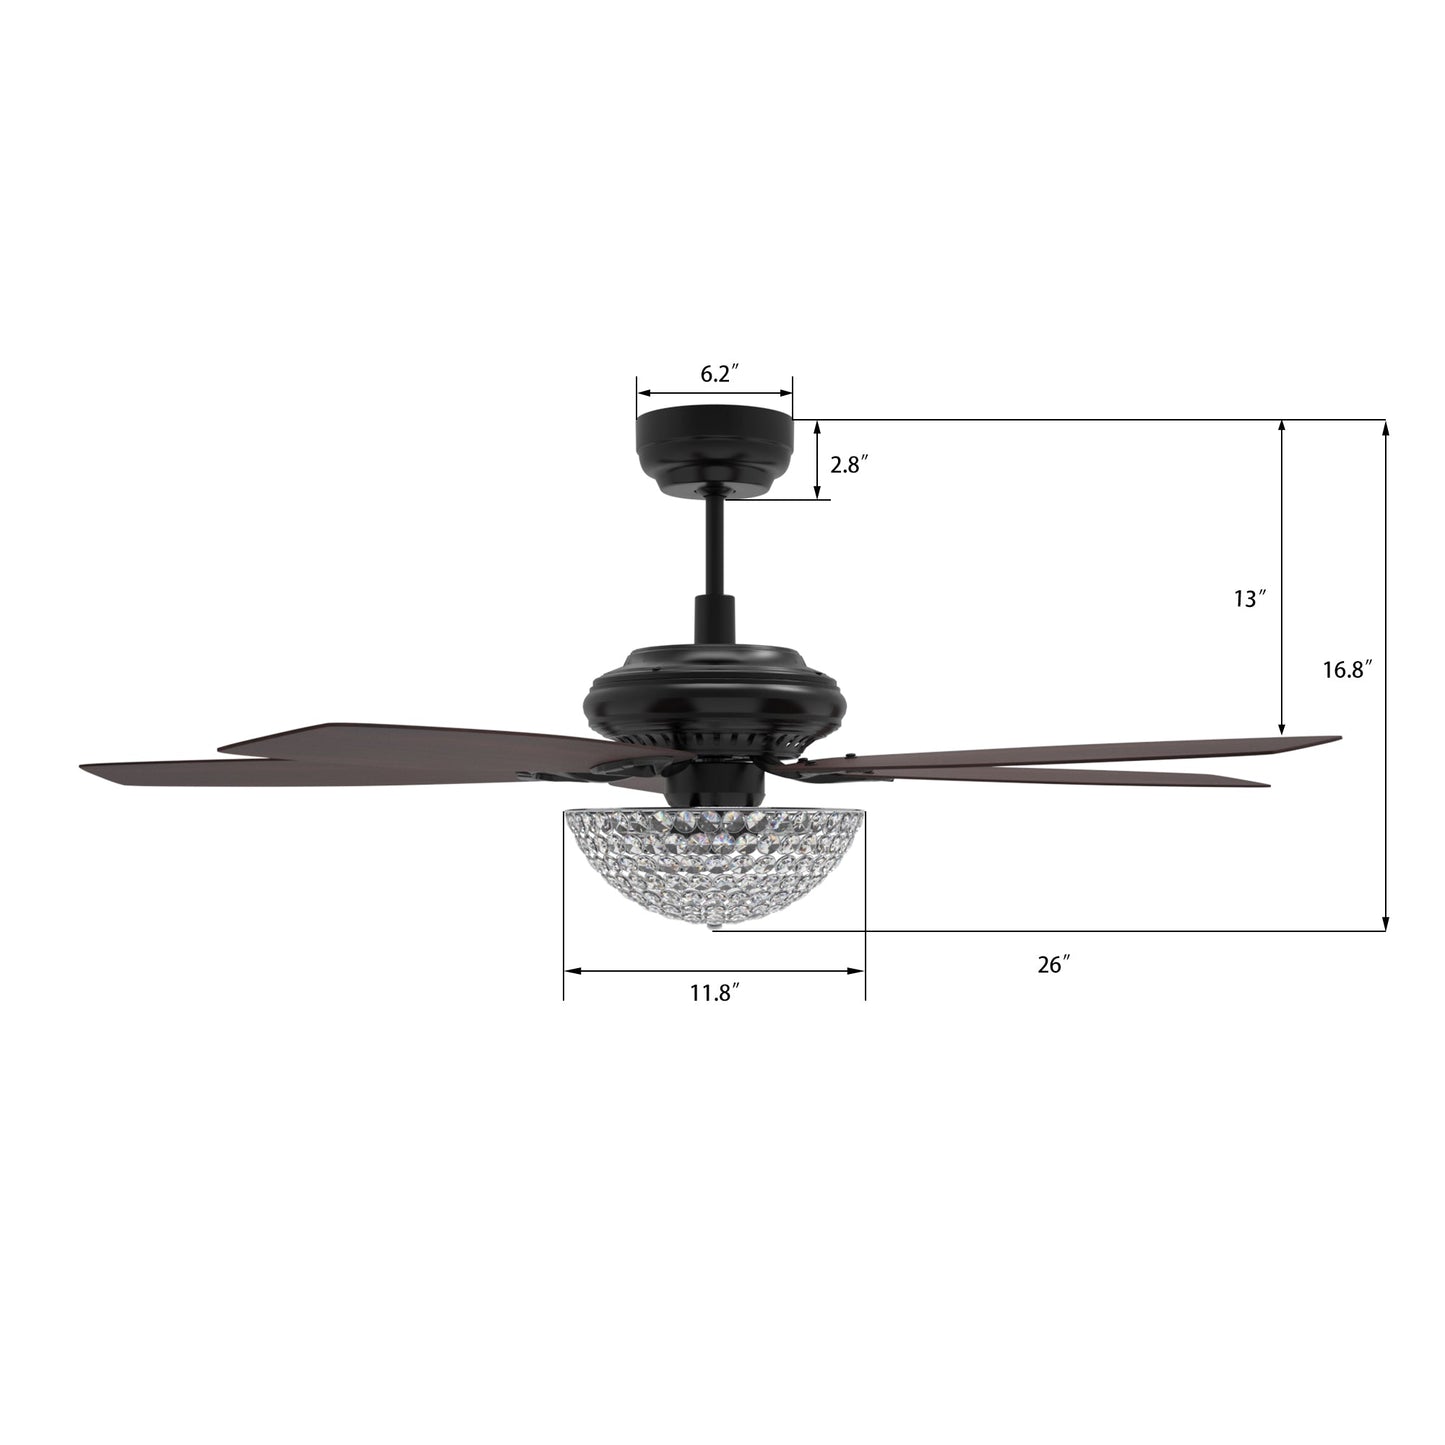 Huntley 52 Inch 5-Blade Crystal Best Ceiling Fan With Light & Remote Control - Black/Rosewood